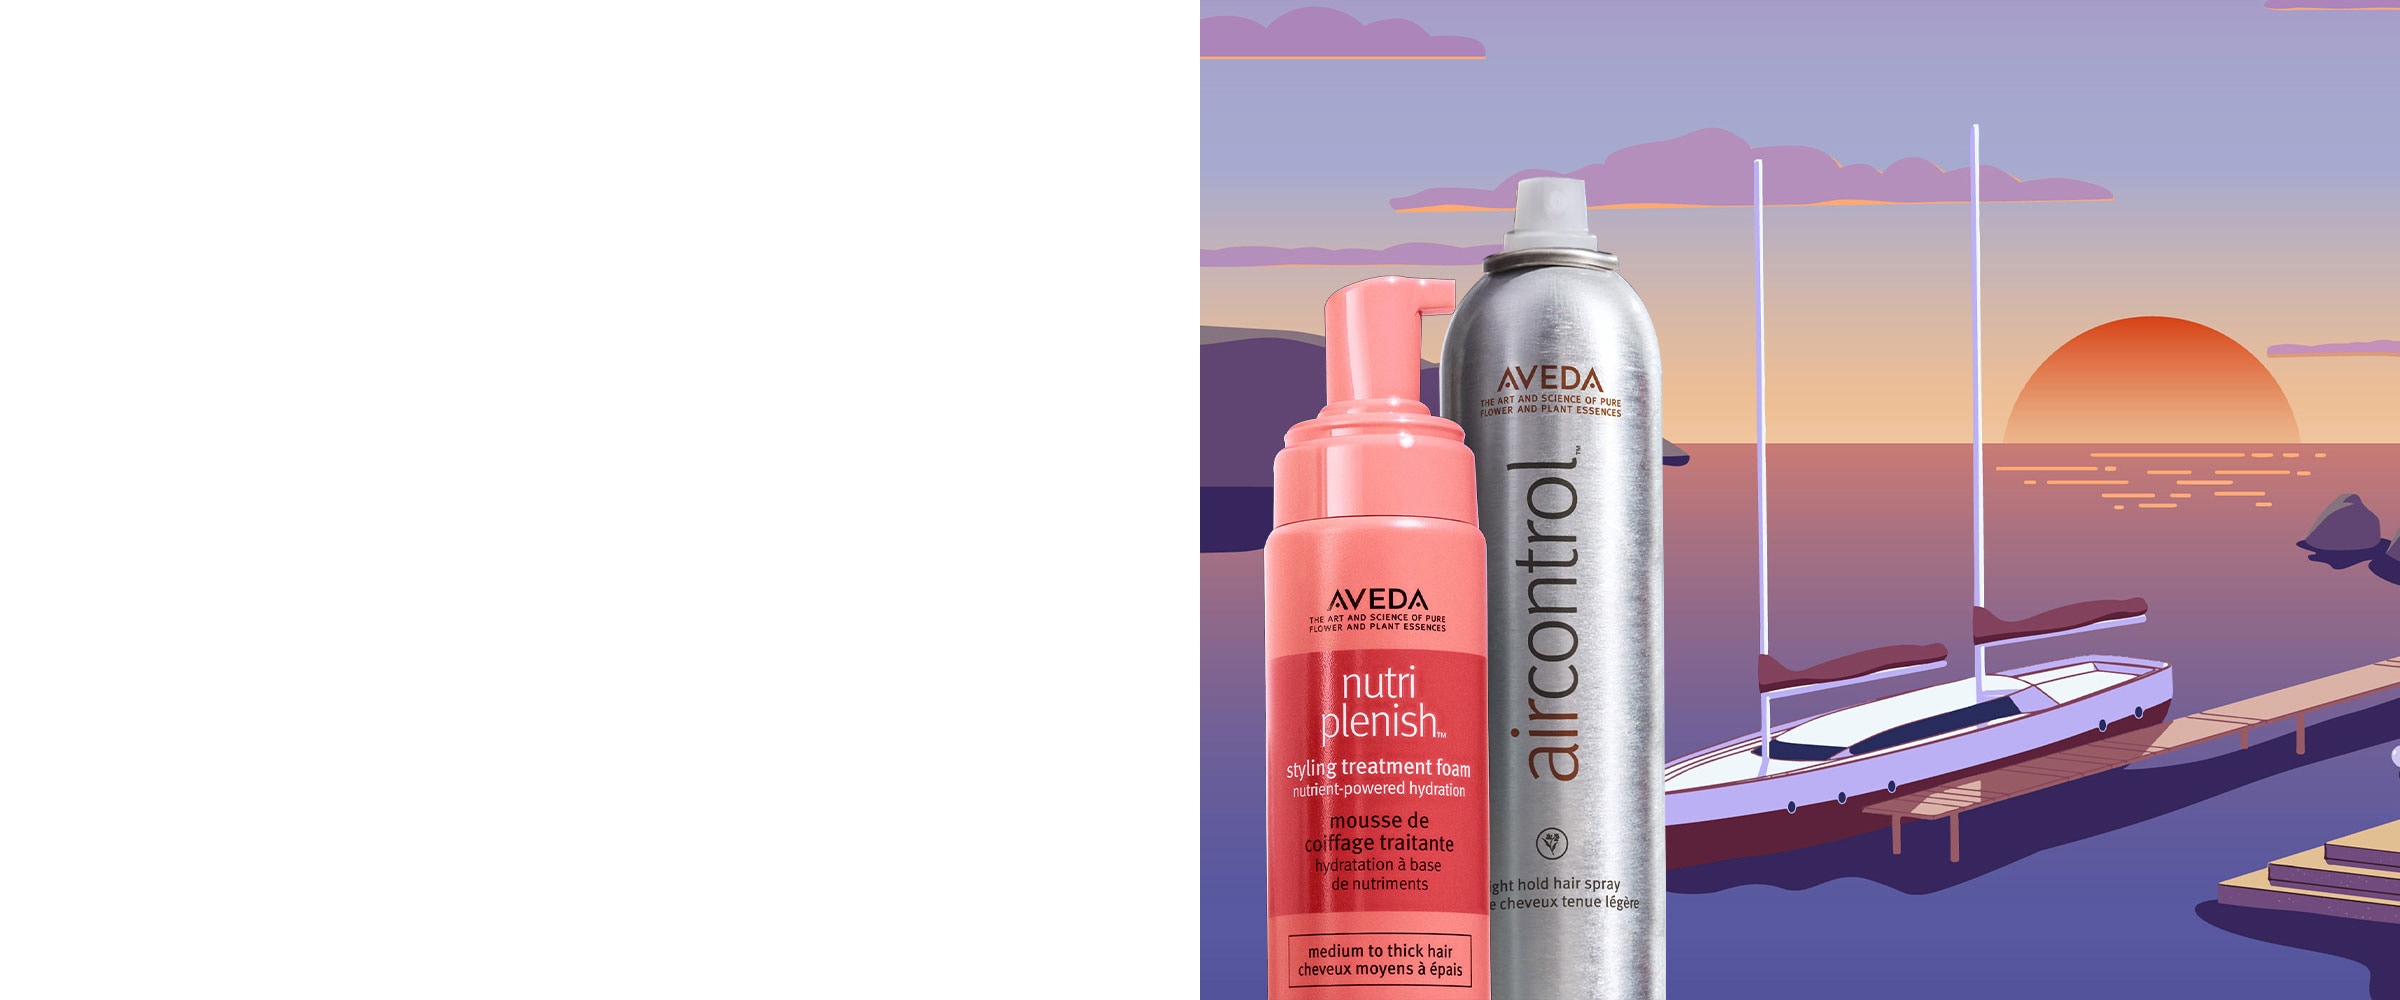 Add nutriplenish styling treatment foam & air control hairspray to cart for ponies, buns and braids.